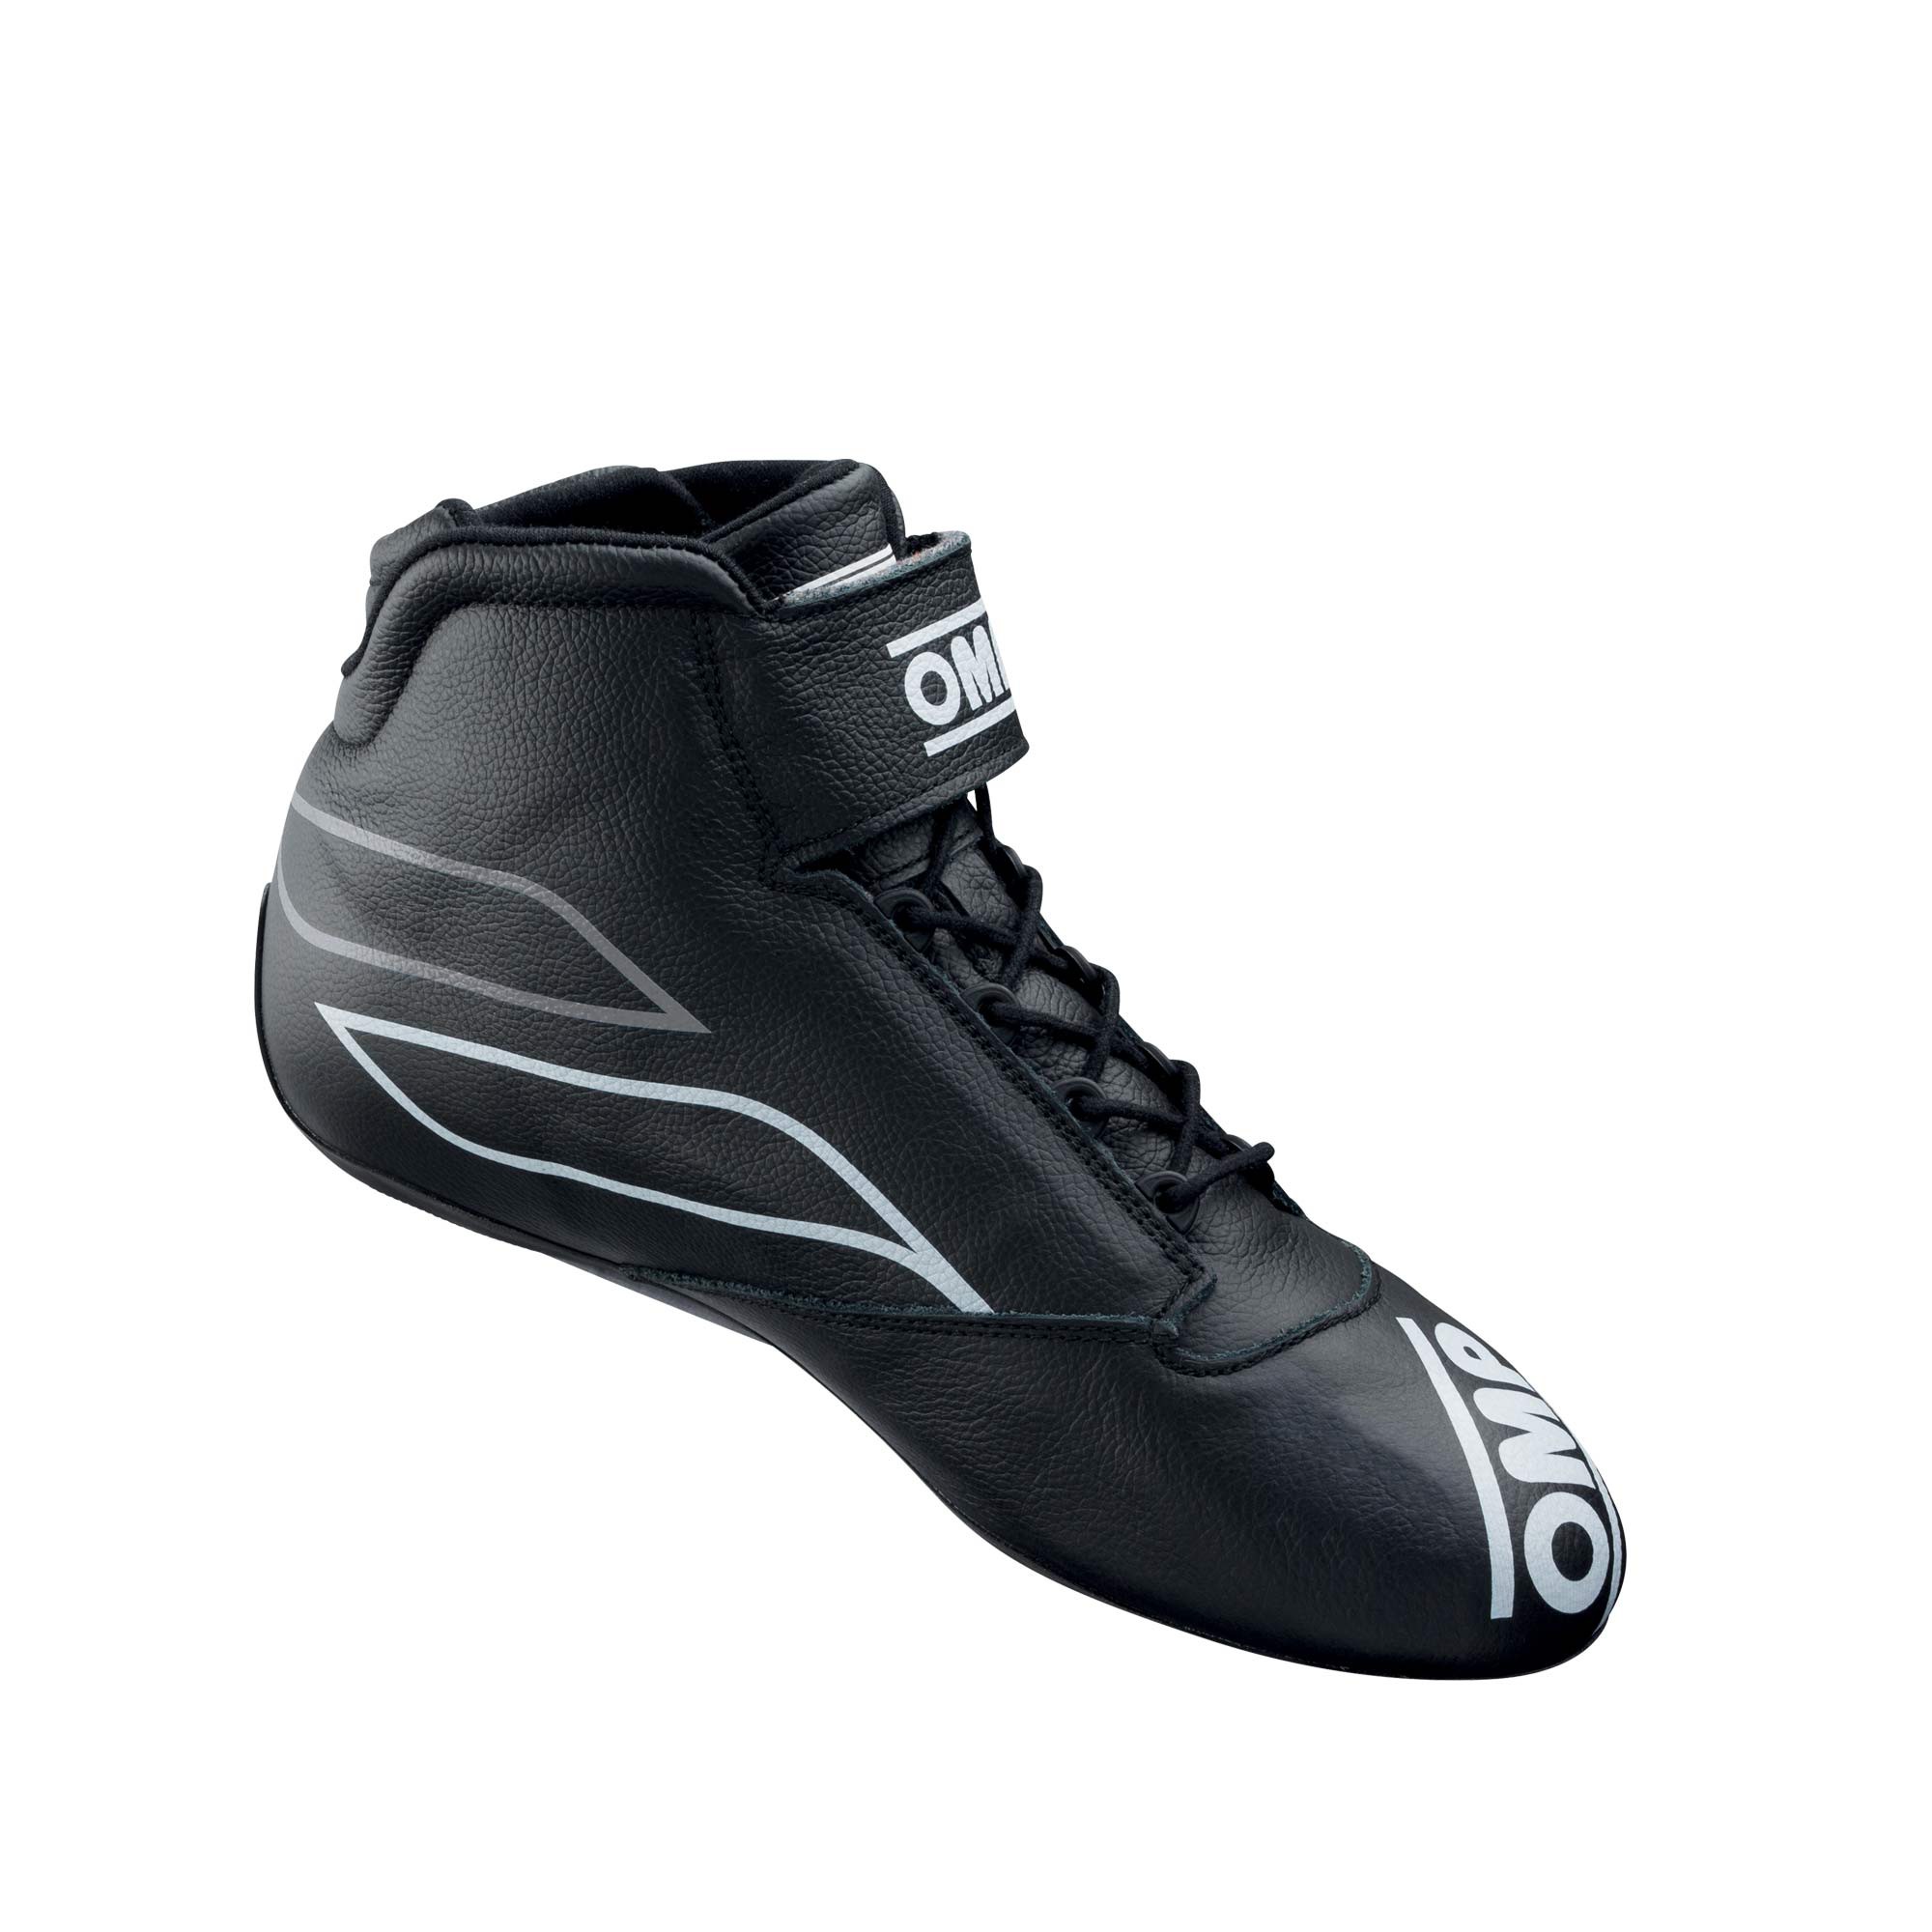 ONE-S SHOES MY 2020 - Racing shoes | OMP Racing